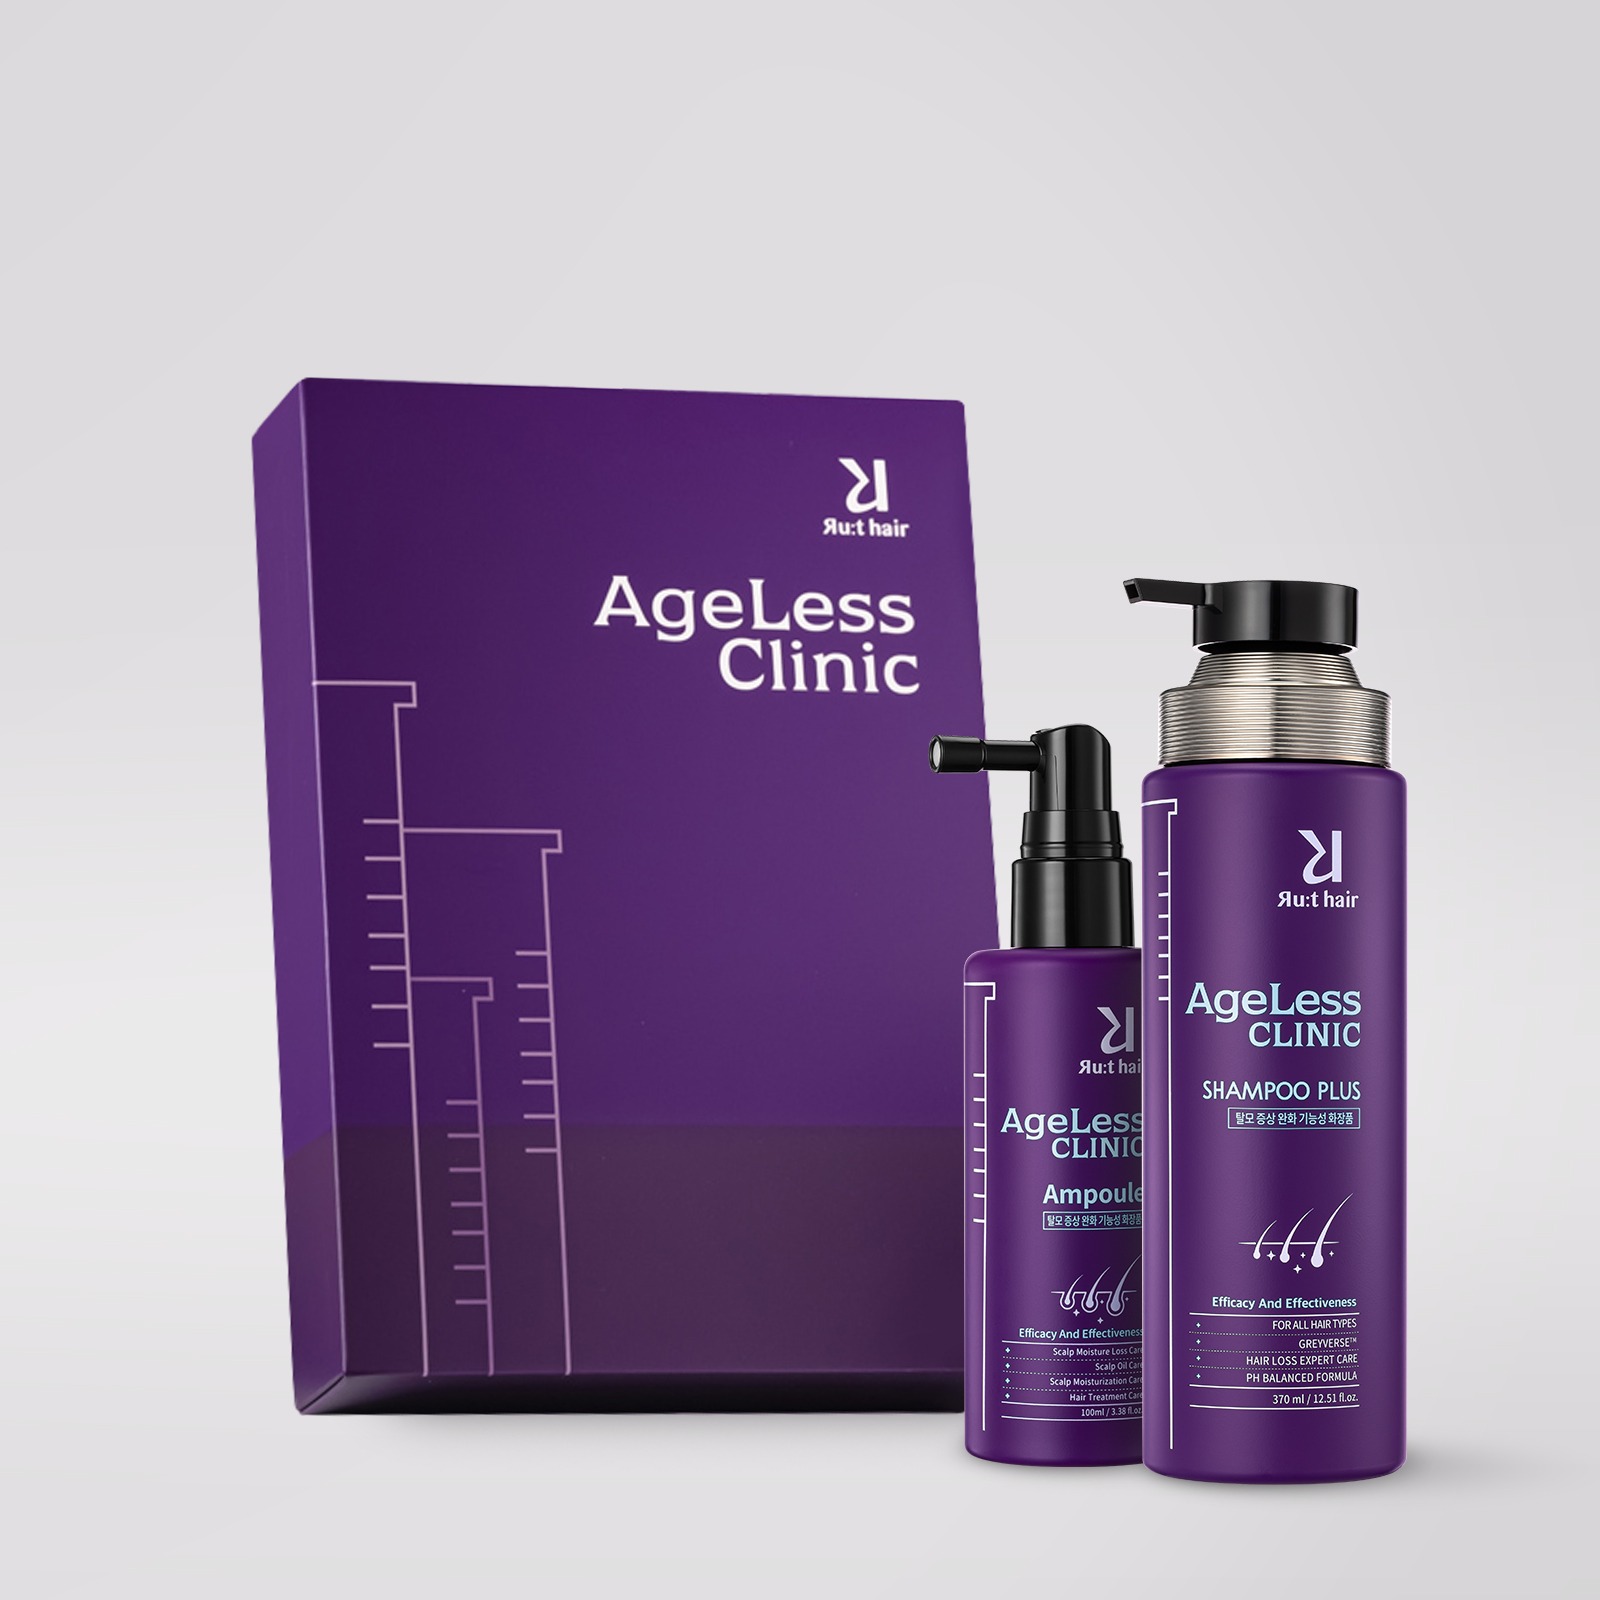 [Family Month &amp; Shopping Bag Presented] Root Hair Ageless Clinic.  Shampoo &amp; Ampoule Set (30% off)